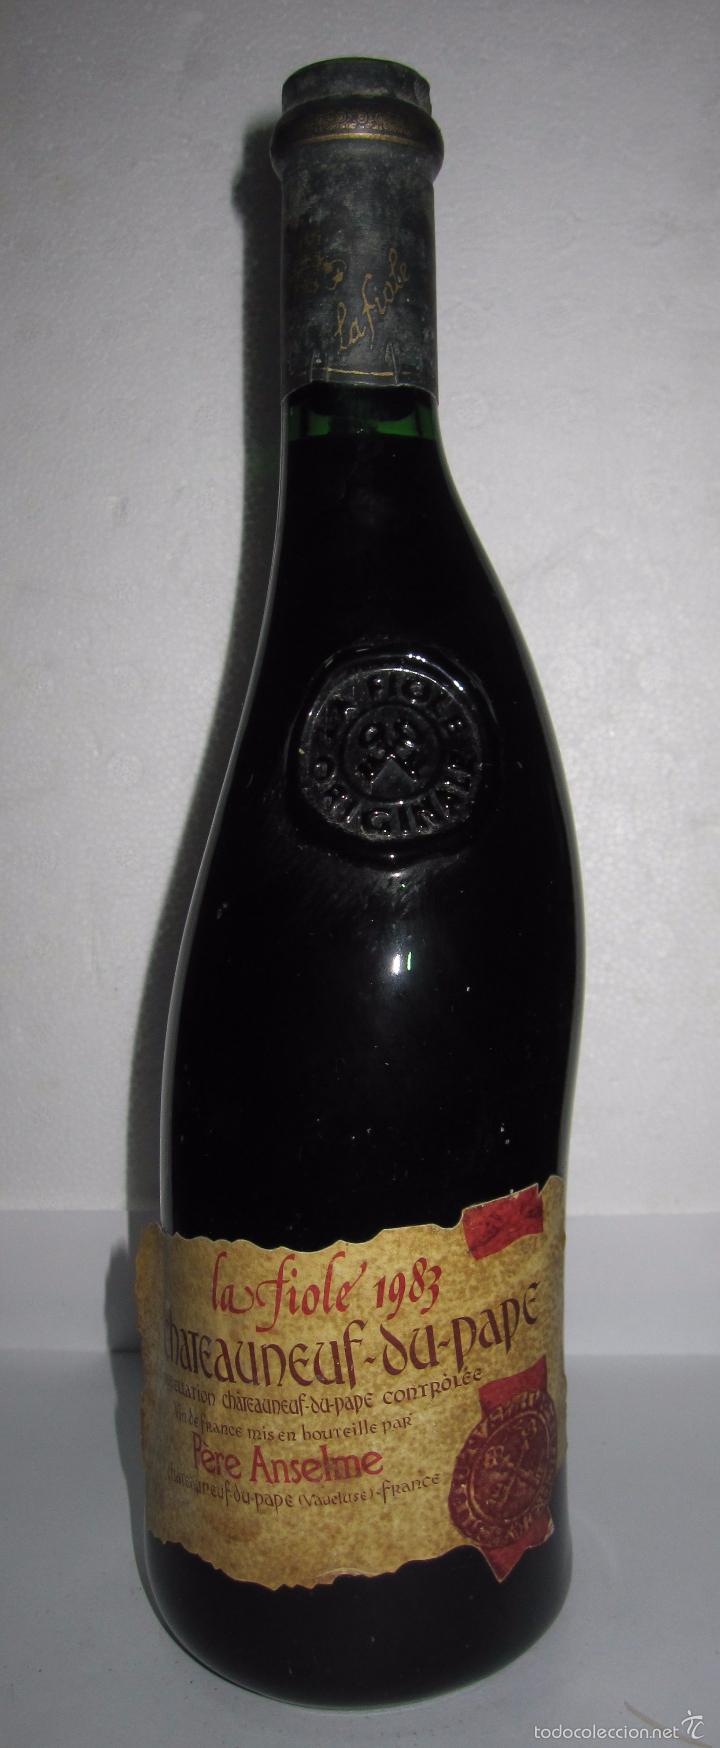 Botella De Chateauneuf Du Pape Pere Anselme F Buy Collecting Wines Liqueurs And Spirits At Todocoleccion